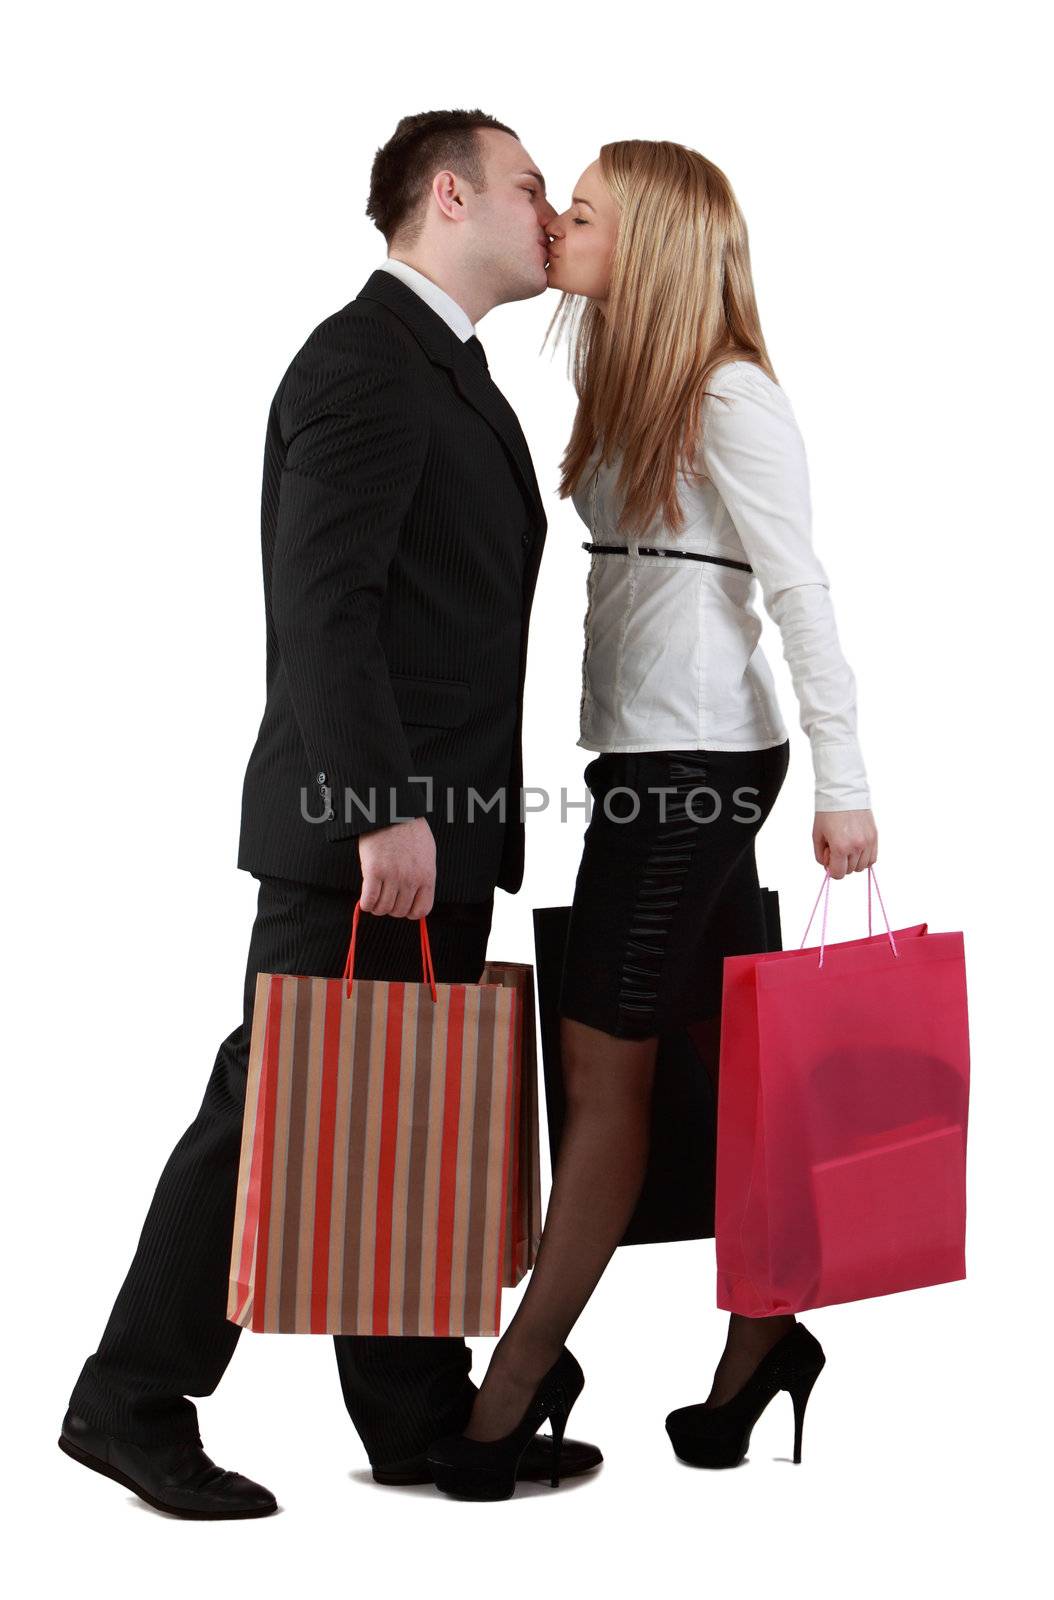 Young couple holding shopping bags and kissing against a white background.